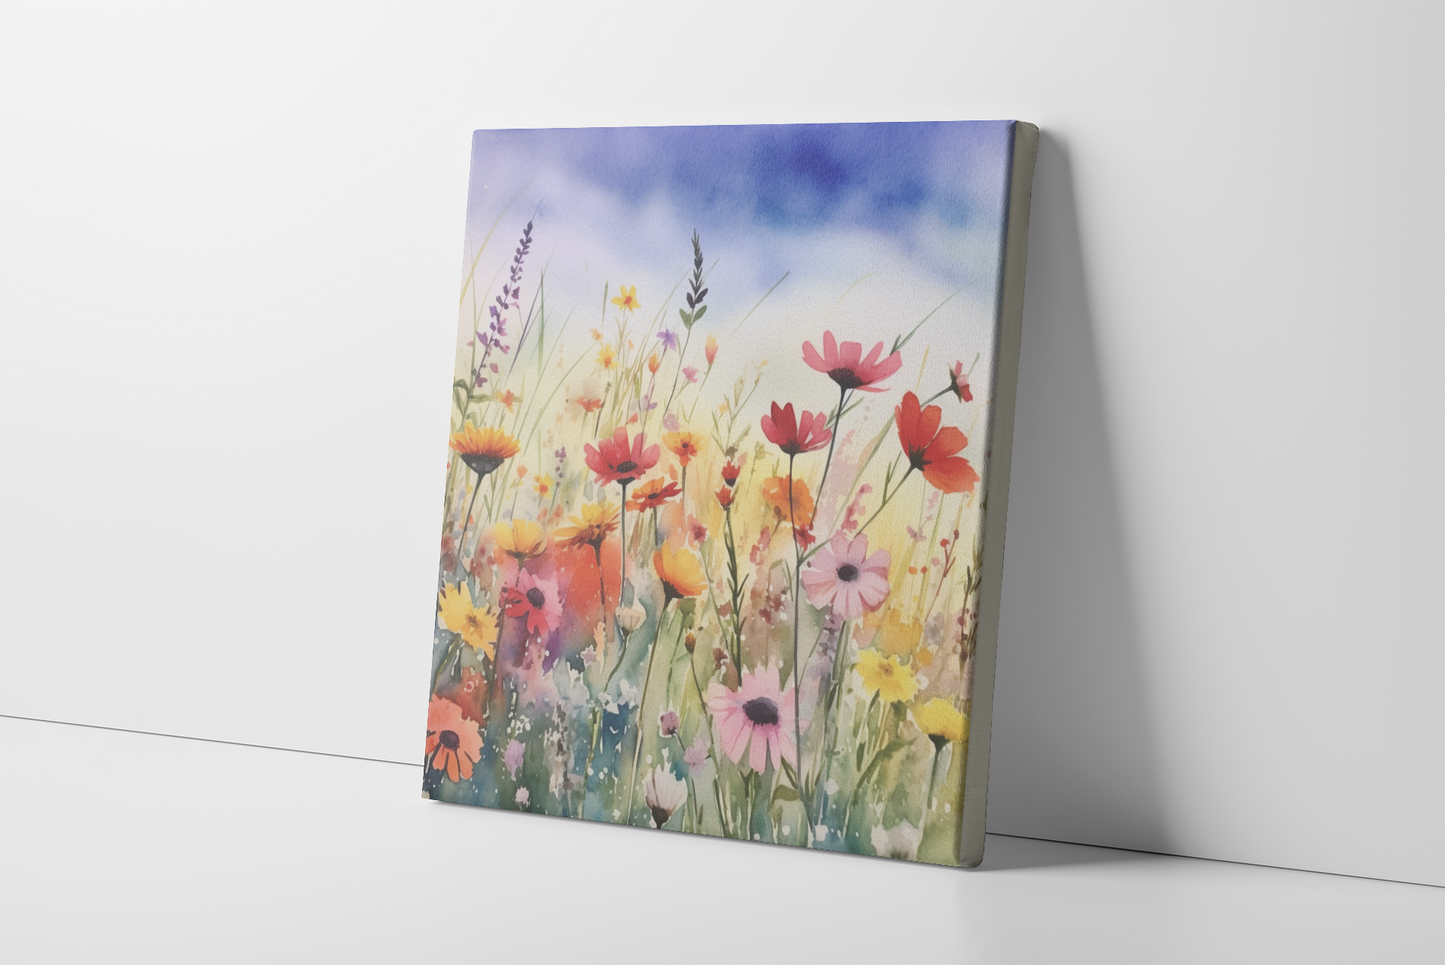 Watercolor Wildflowers Canvas Wall Art, Wild Flower Painting, Beauty of Nature Canvas, Vibrant Field of Flowers Art, Mother's Day Gift